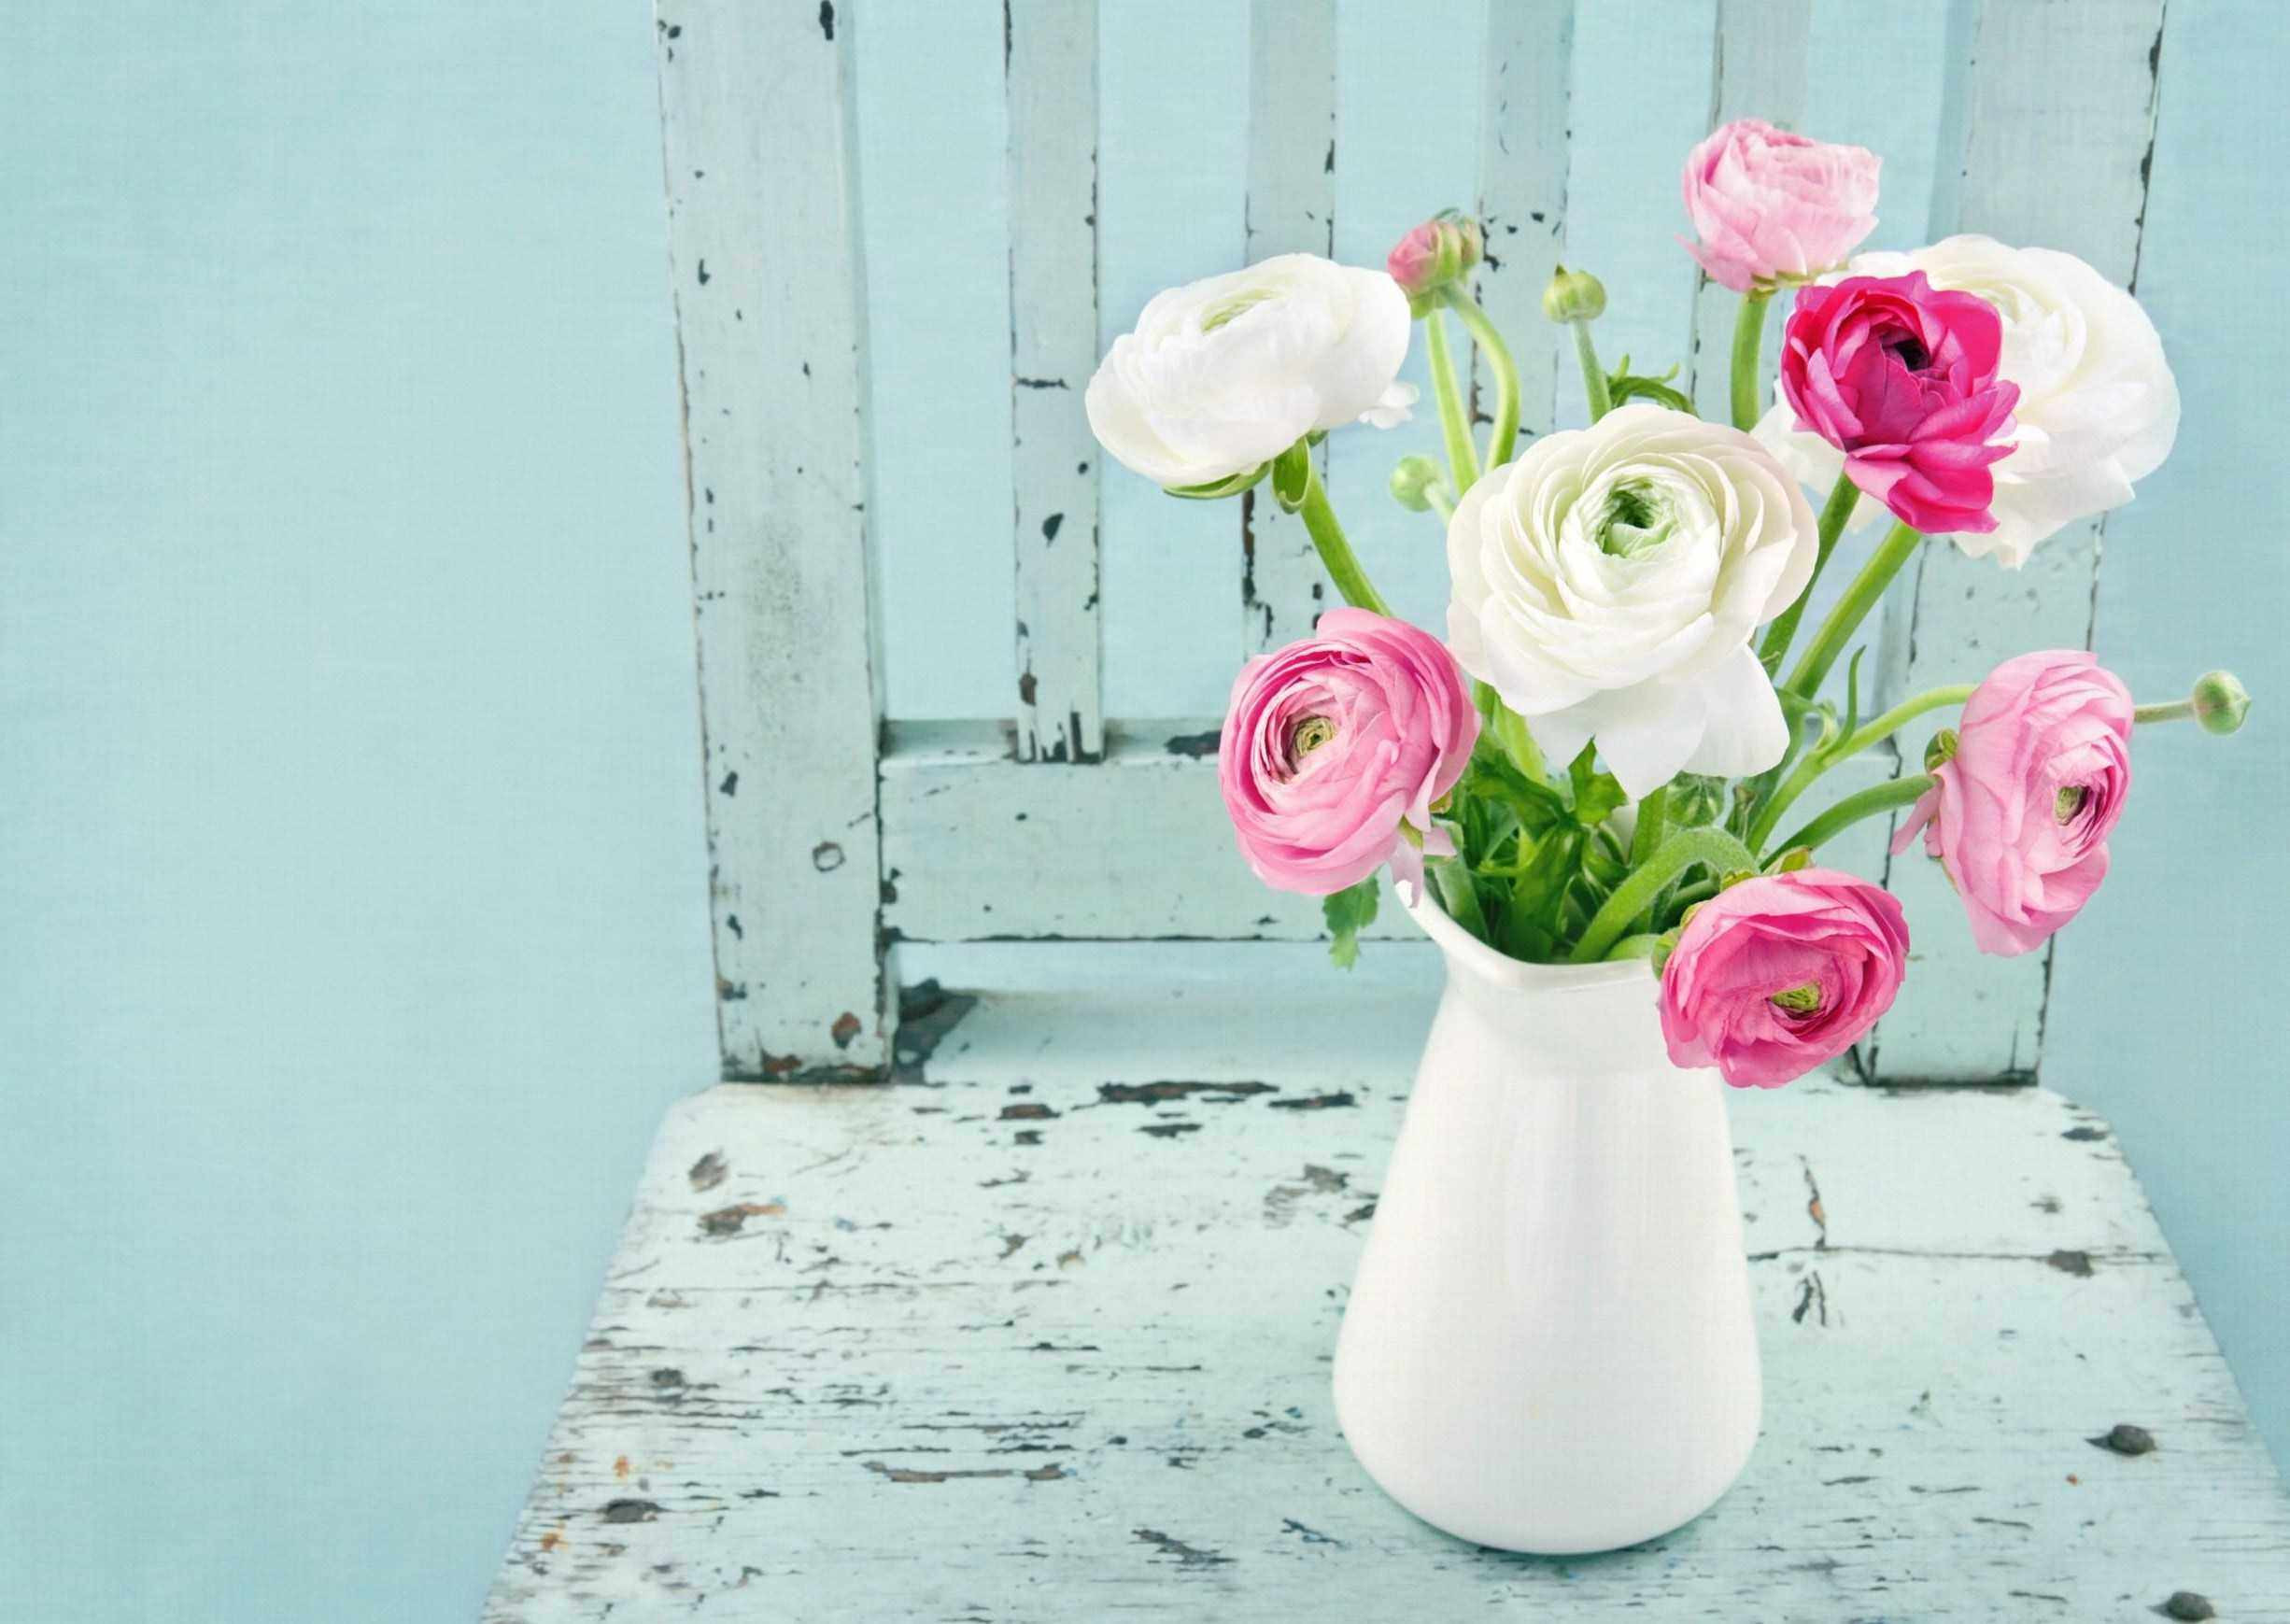 19 Recommended Living Room Vase 2024 free download living room vase of flowers new orleans fresh living room roses in a vase new clear vase with flowers new orleans fresh living room roses in a vase new clear vase 0d tags amazing elegant